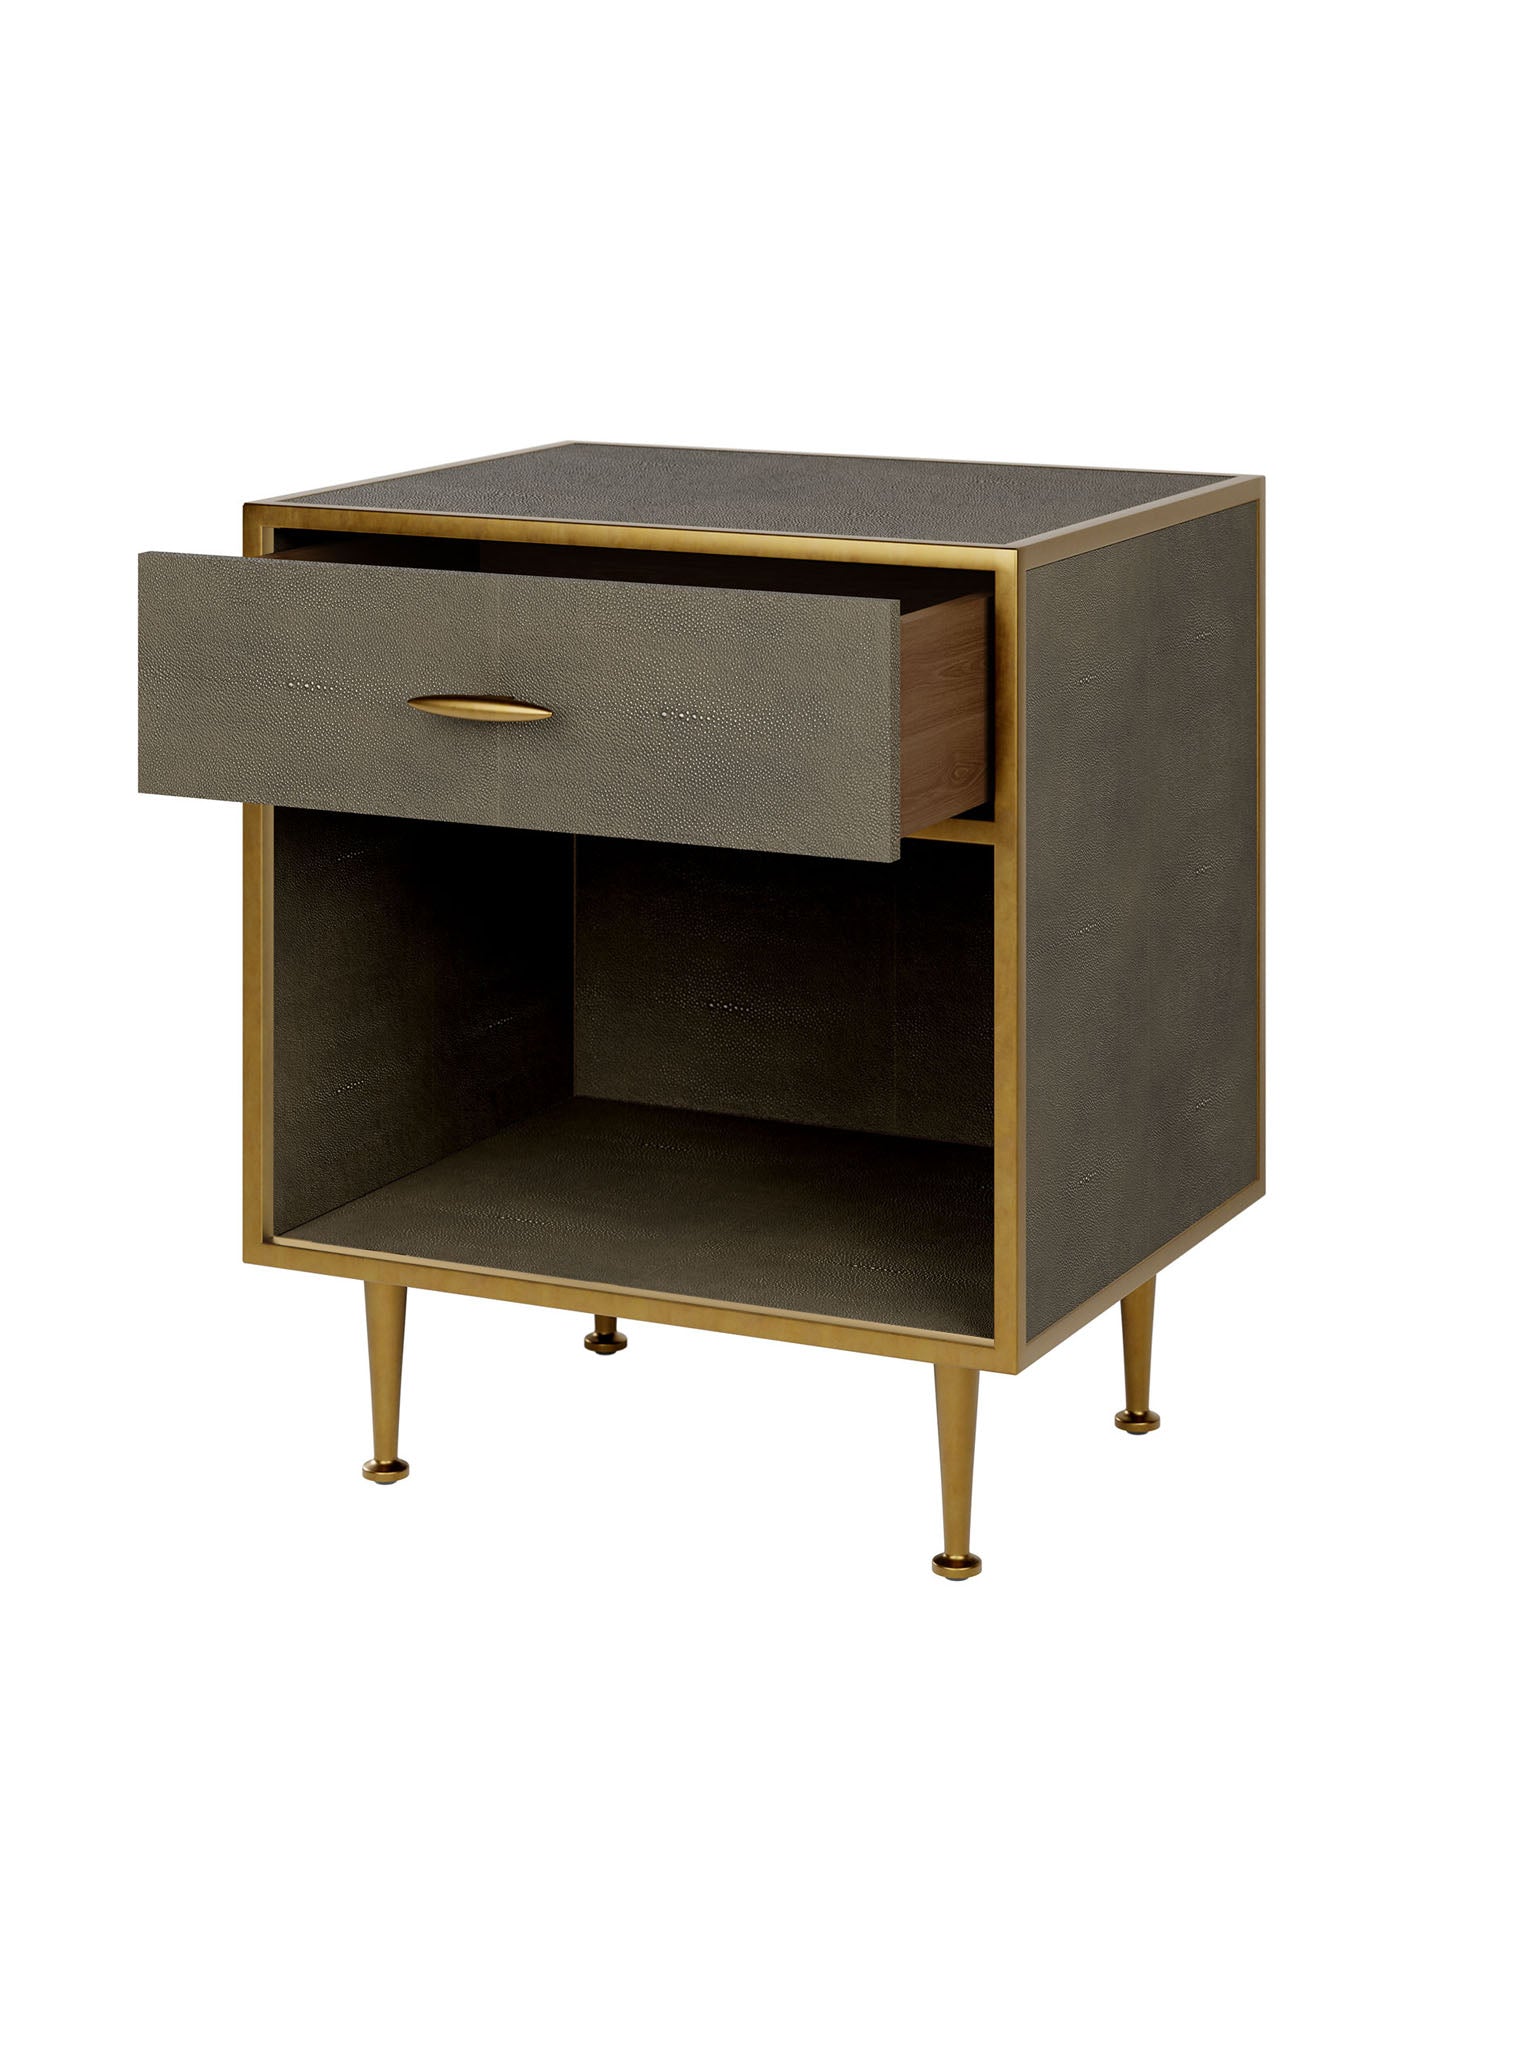 Bedside Table in Grey Shagreen with Antique Brass Accents